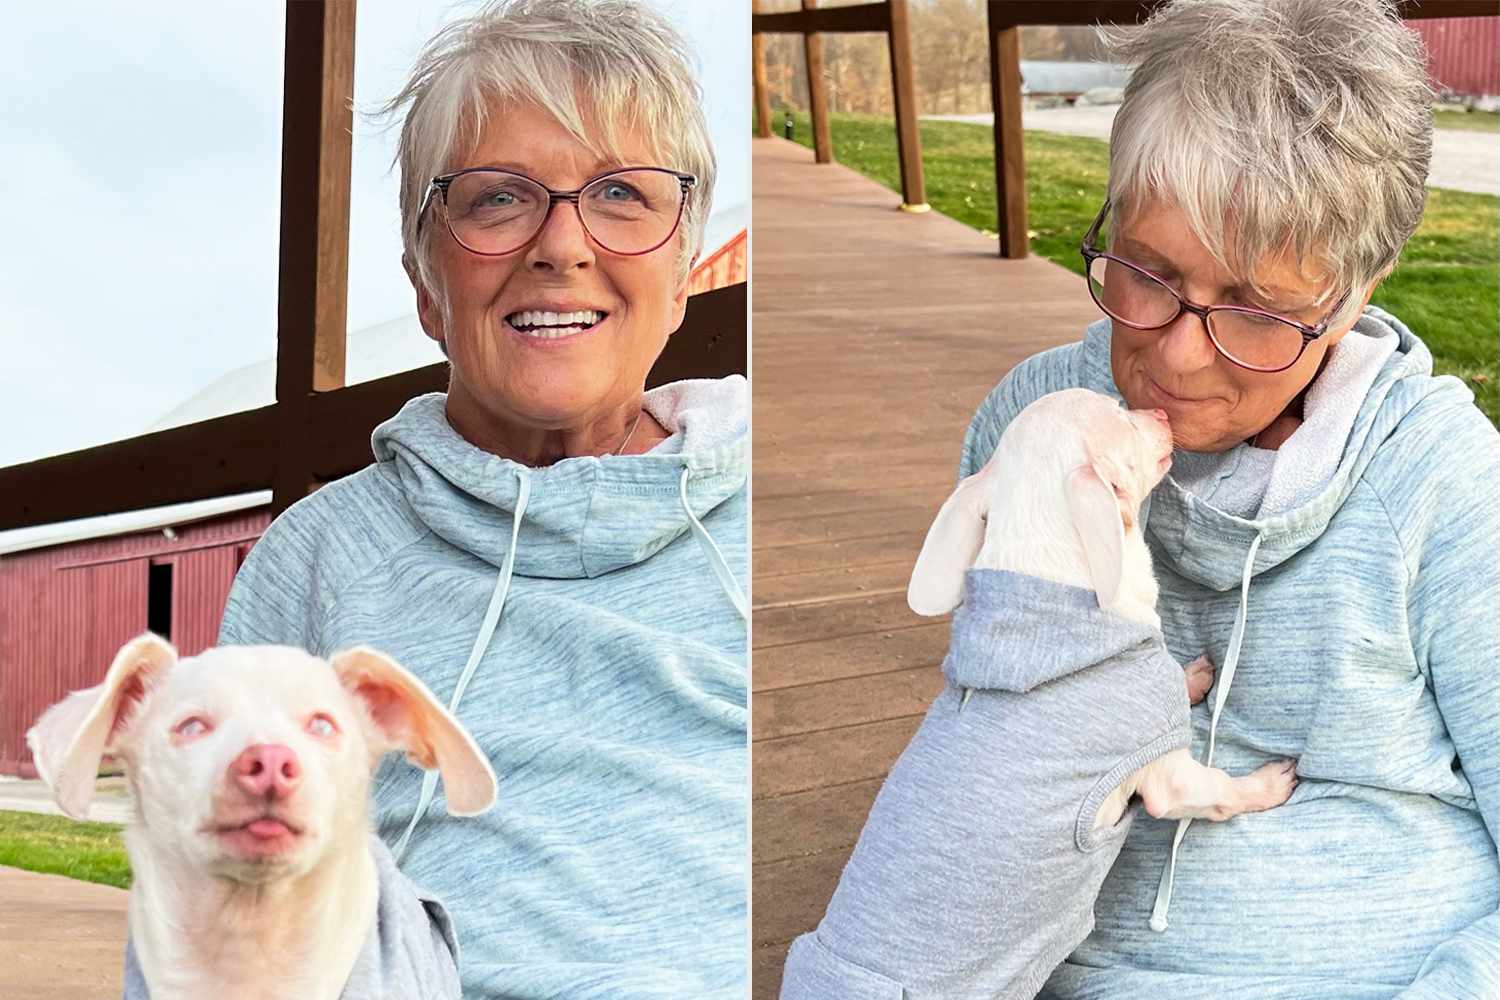 Blind, Deaf Dog Piglet Meets Fan He Helped Out of ‘Very Dark Place’ [Video]